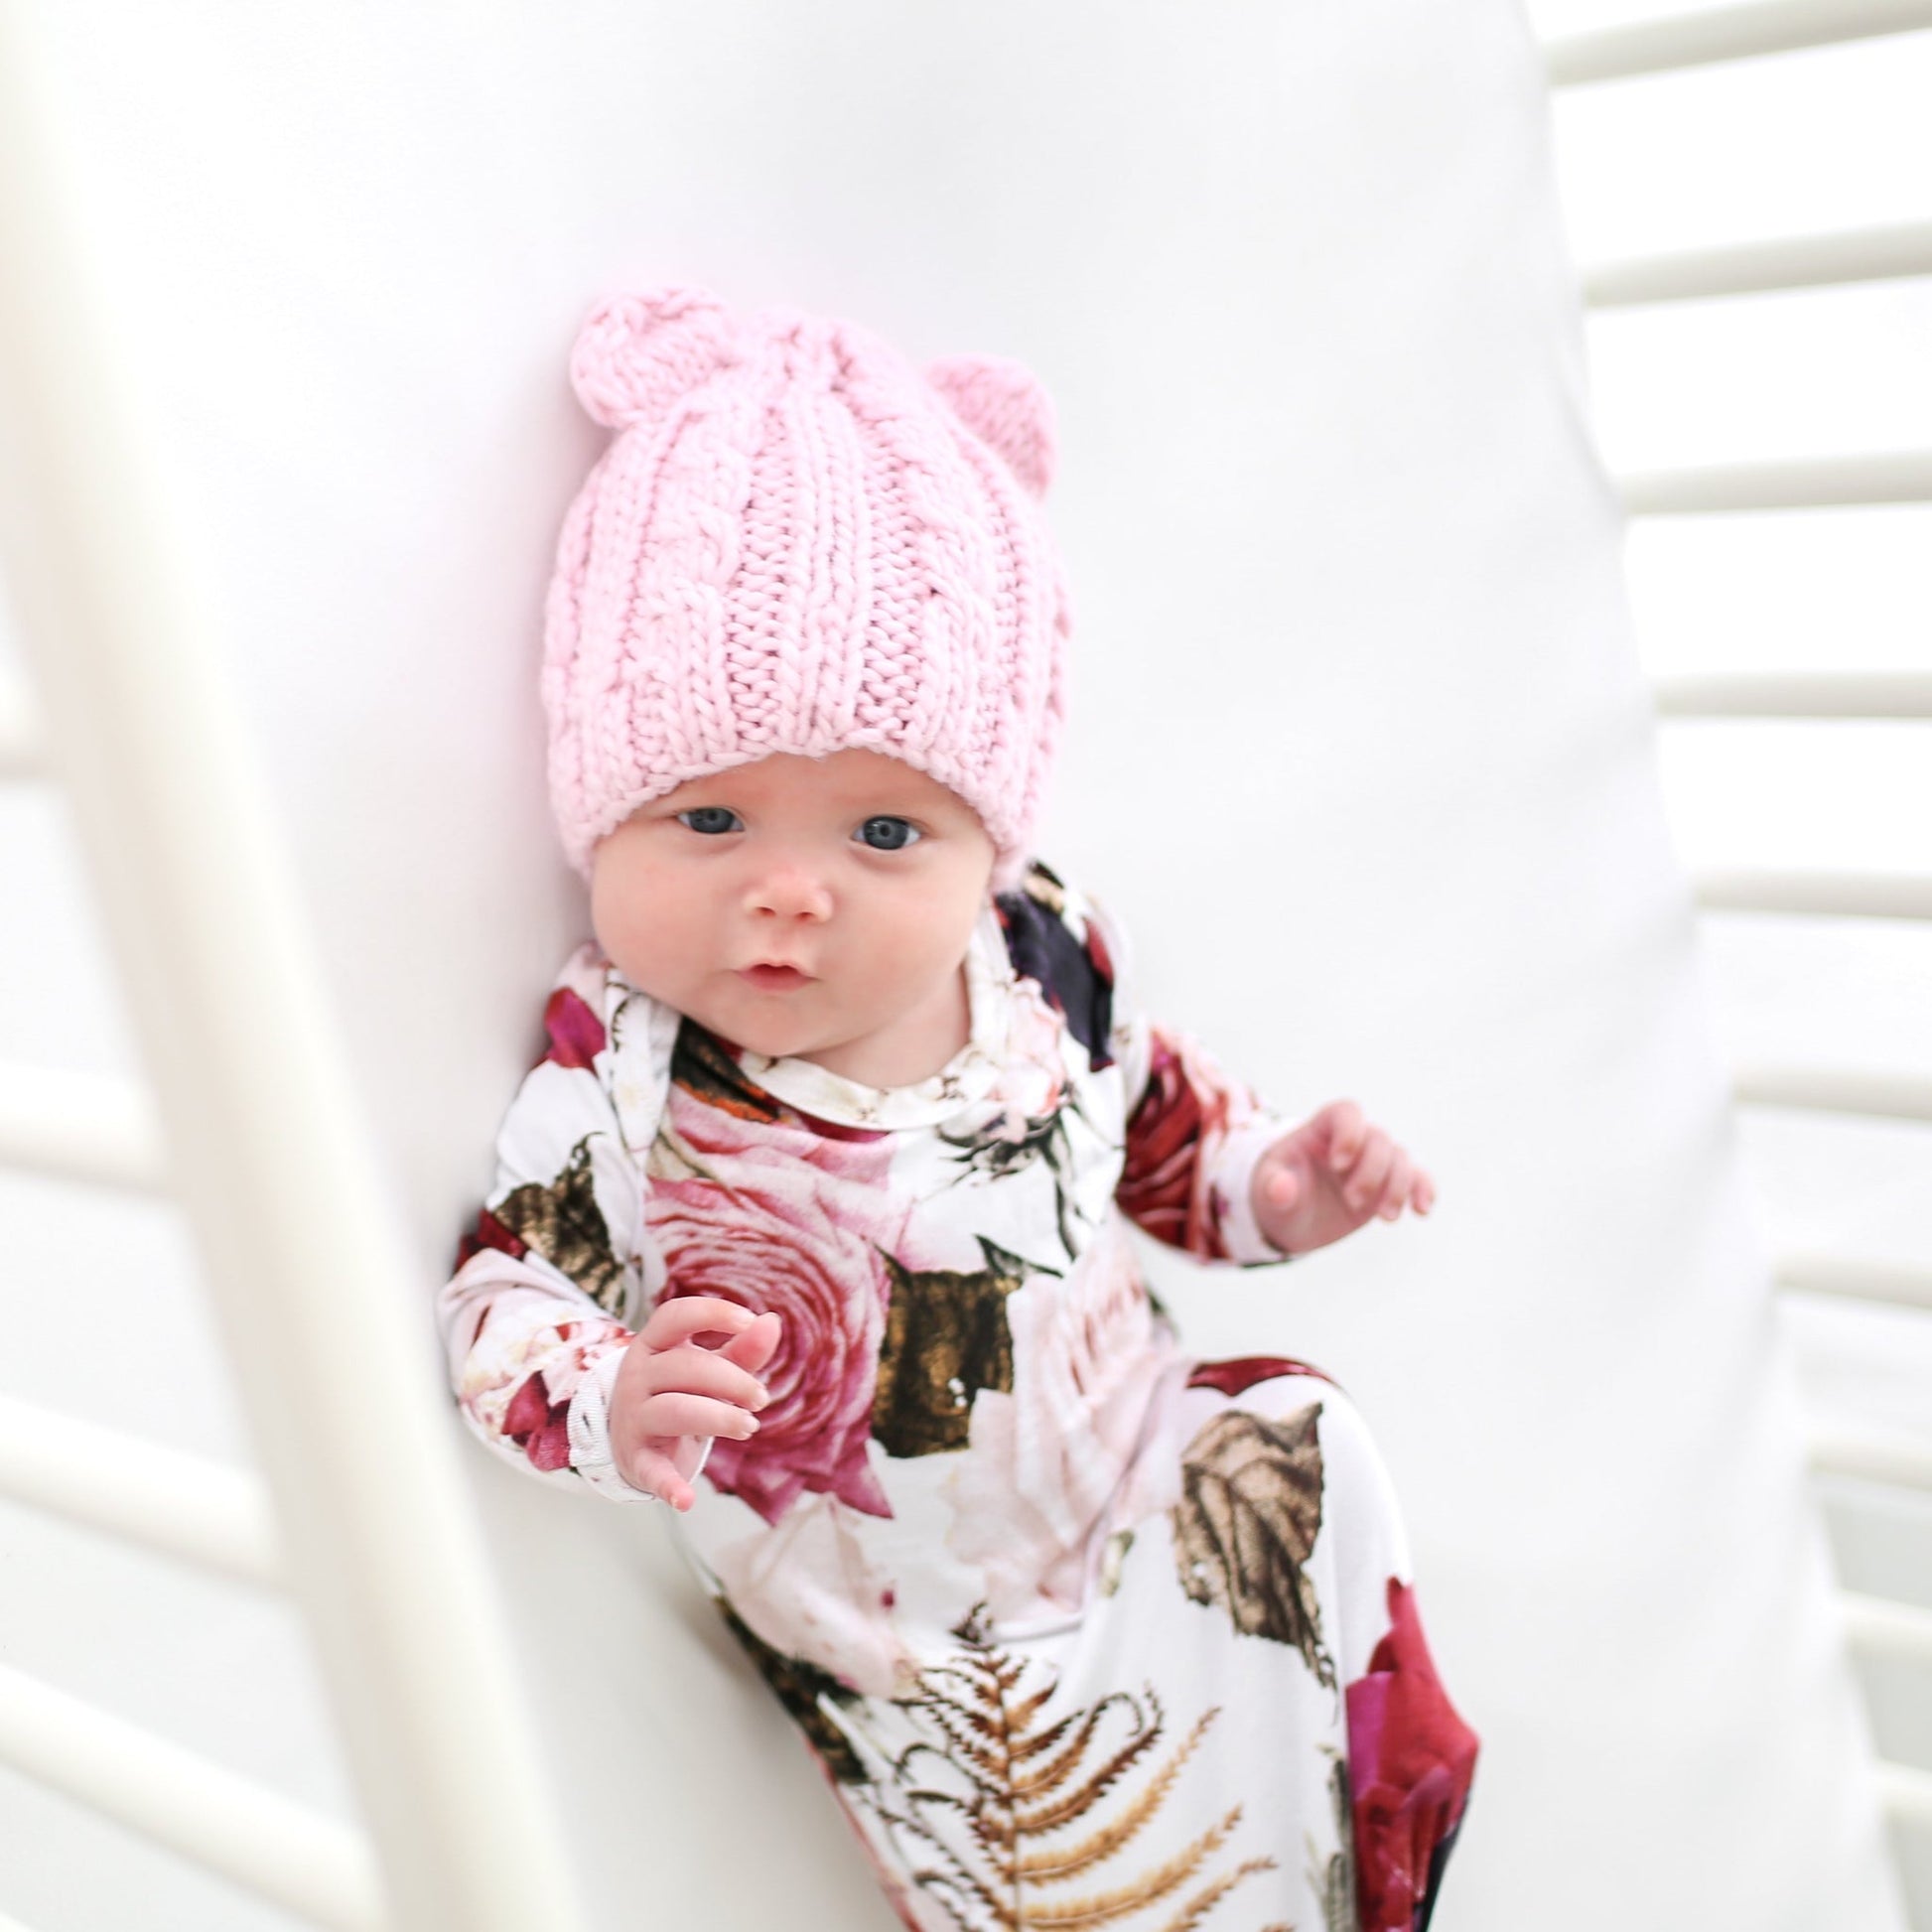 cable knit hat for baby and child with bear ears in pink